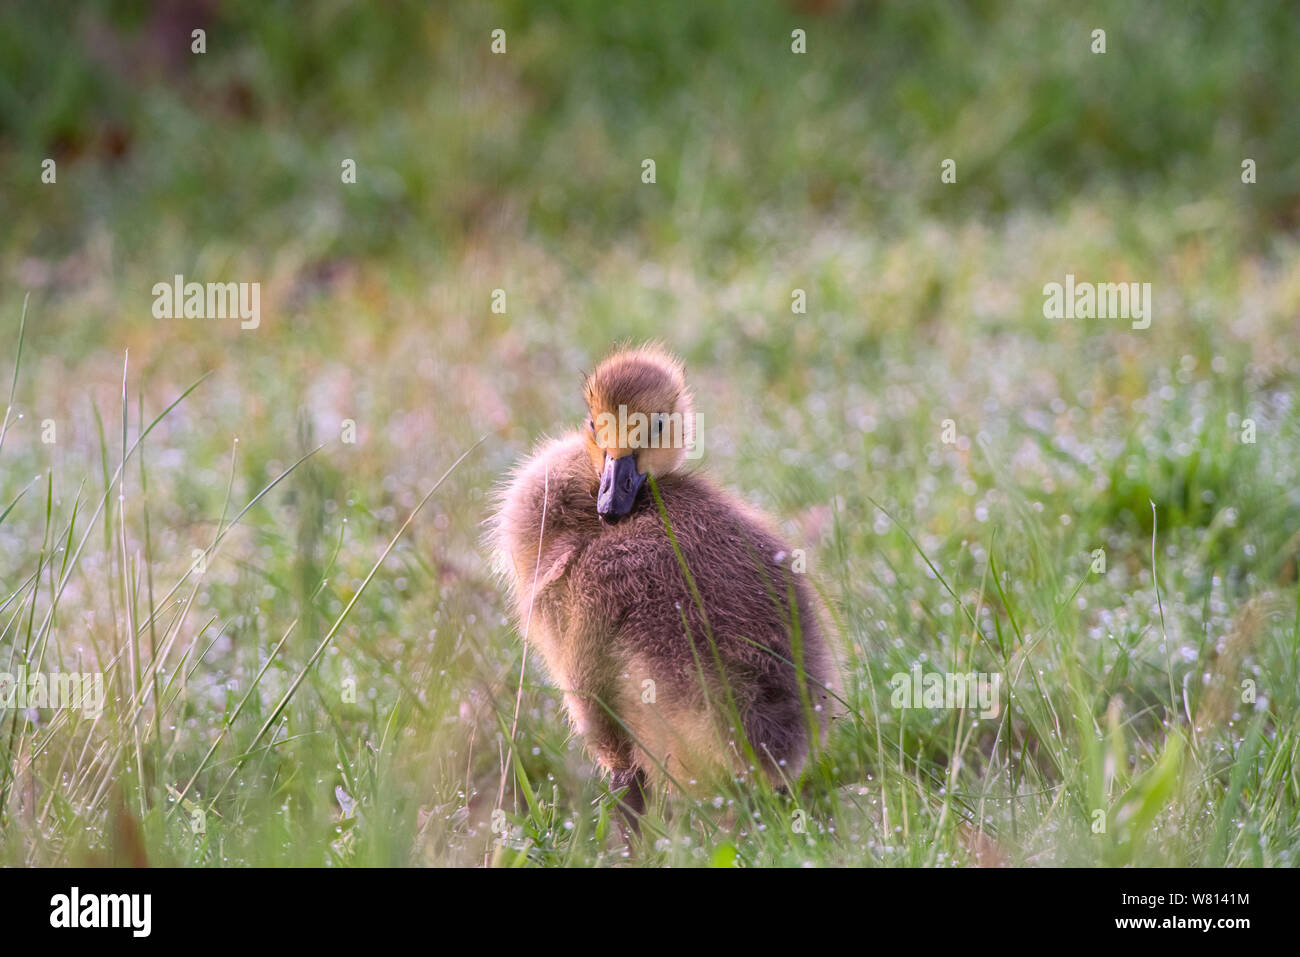 A Canada Goose Gosling (Branta canadensis) preens feathers while its adopted Sandhill Crane family stands nearby at Kensington Metropark, Milford, Mi Stock Photo